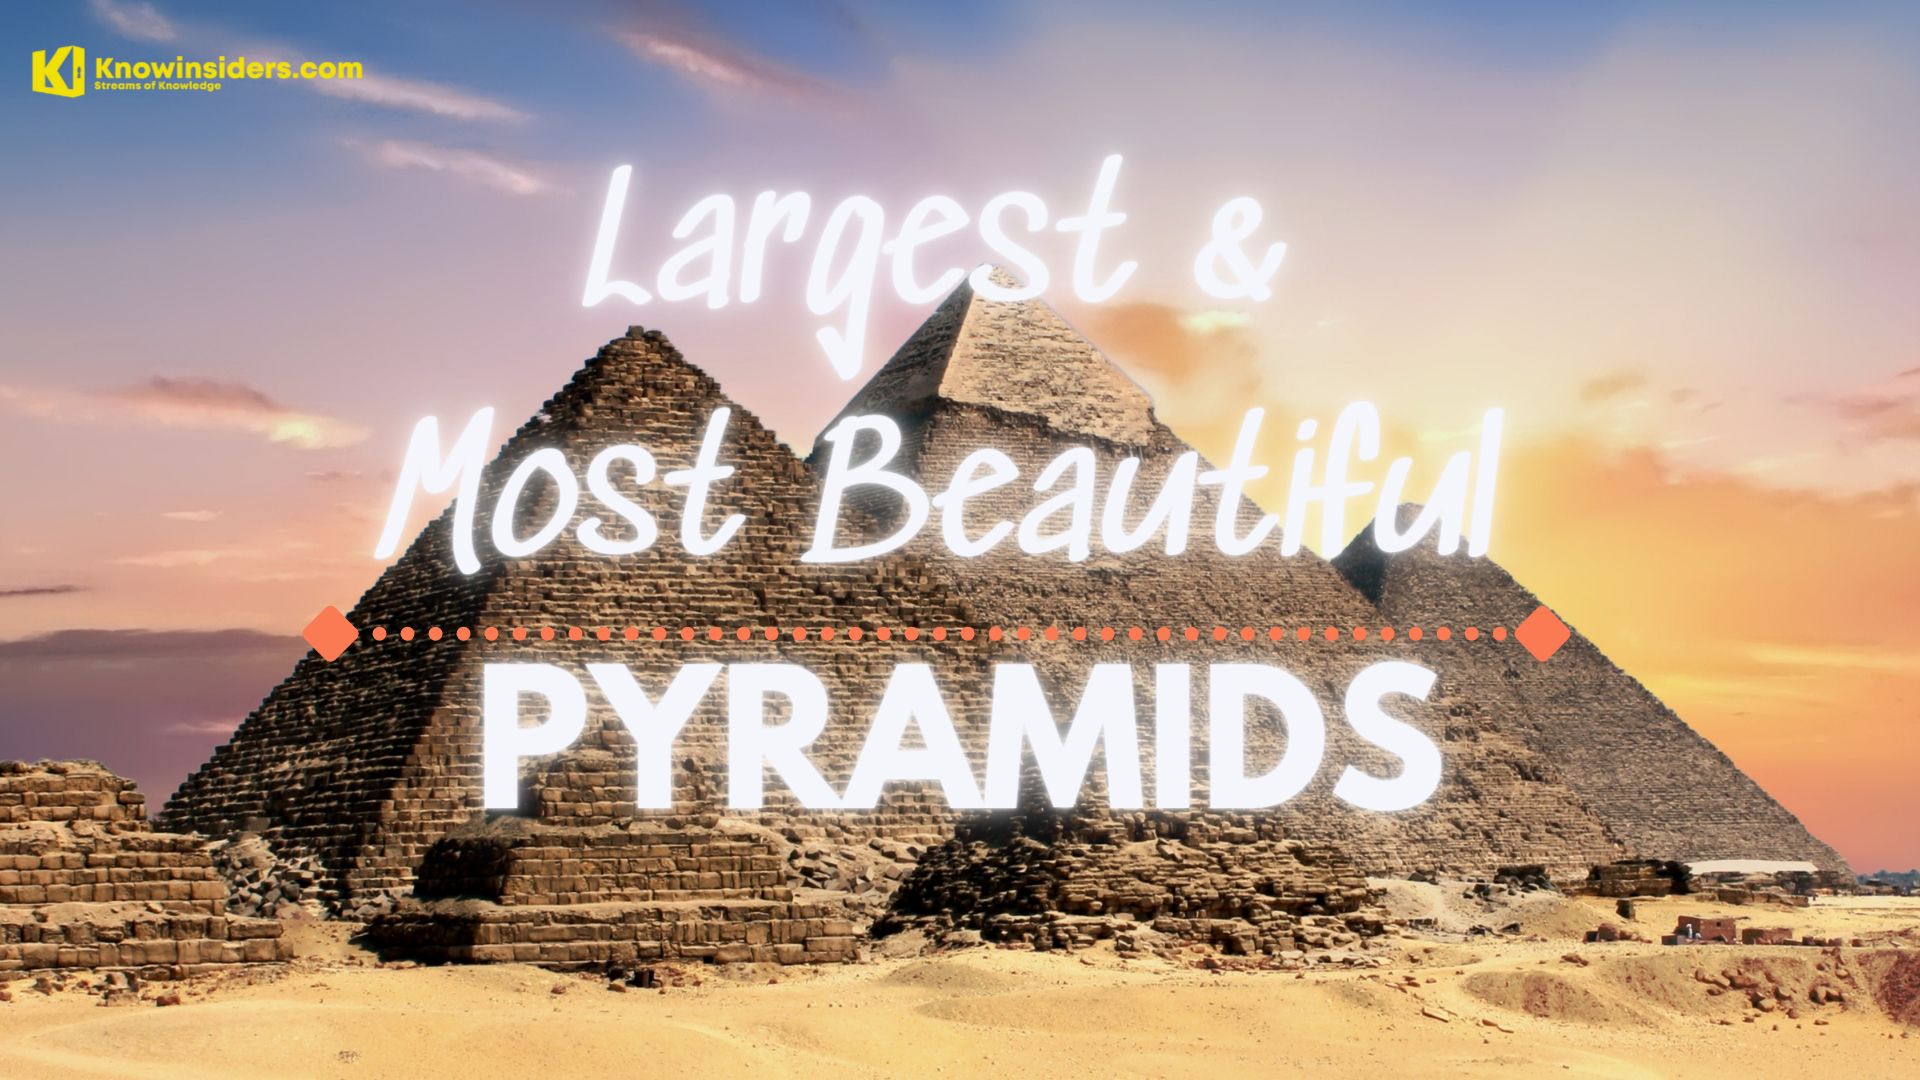 Largest and most beautiful Pyramids in the World. Photo: knowinsiders.